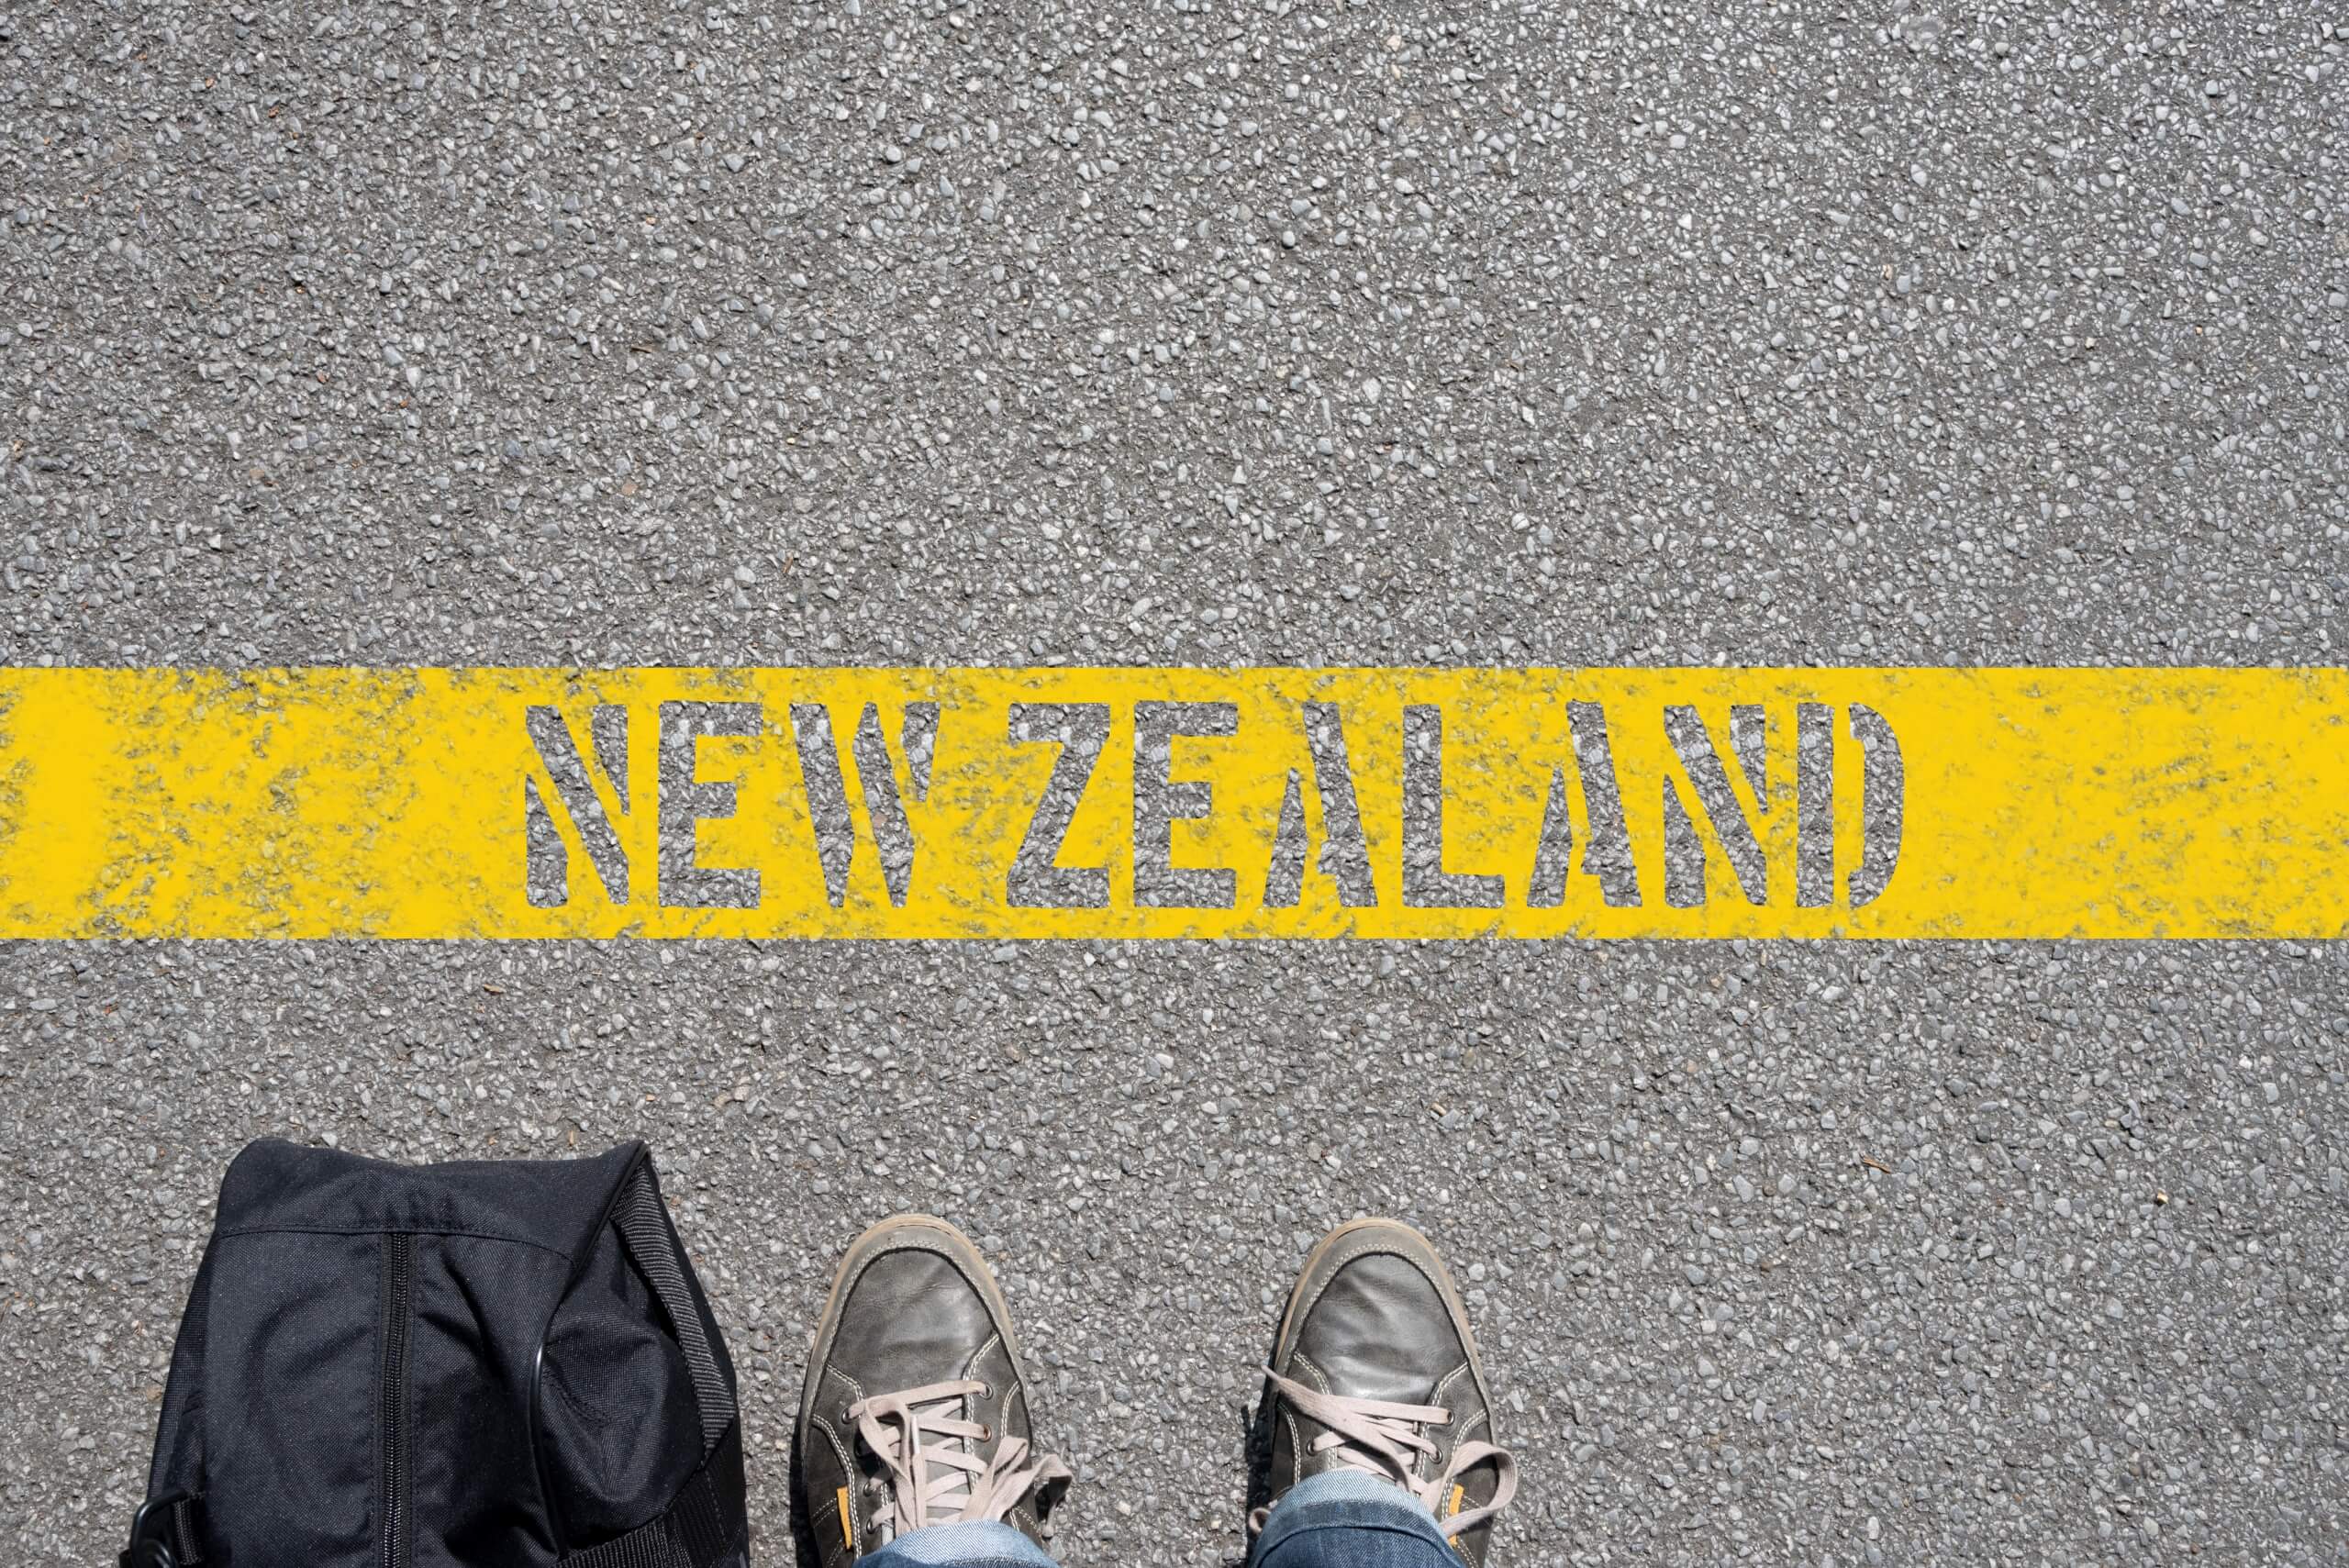 Emigrating to New Zealand when you are 50 years old